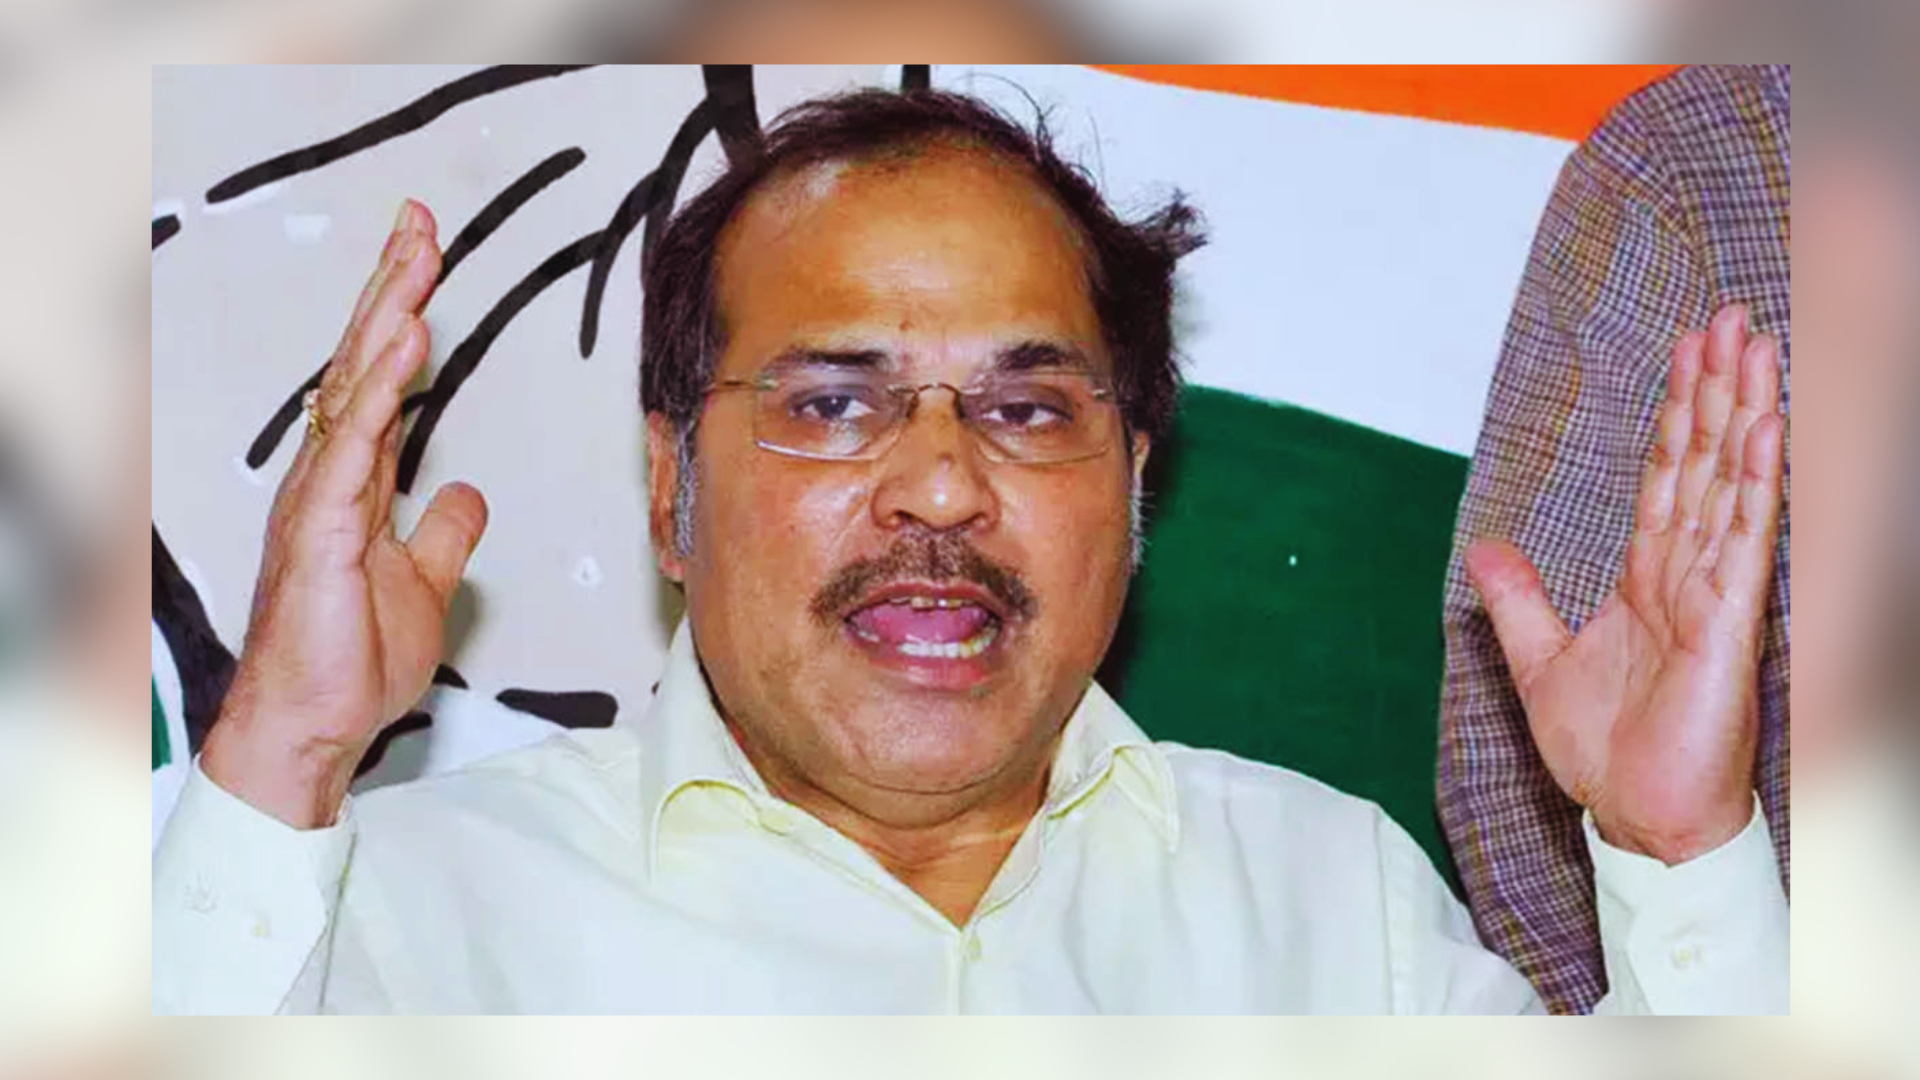 Congress’ Adhir Ranjan Chowdhury Sparks New Row After Referring To Indians As ‘Mongolians, N-types’: ‘Some People Are White And Some Are…”